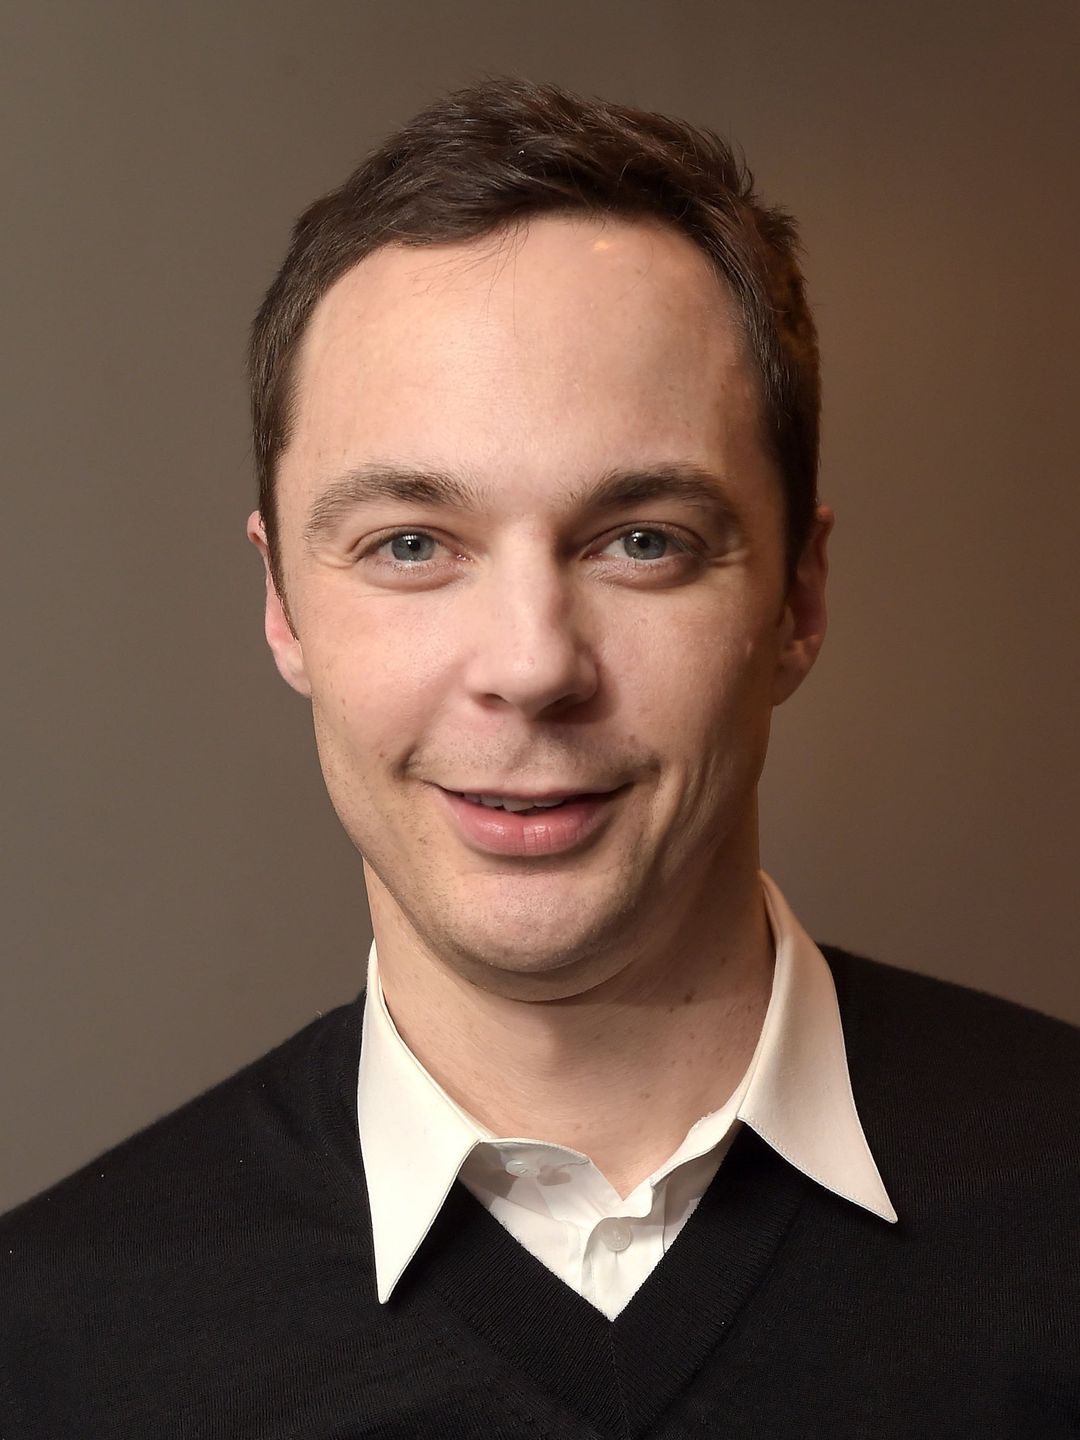 Jim Parsons where does he live